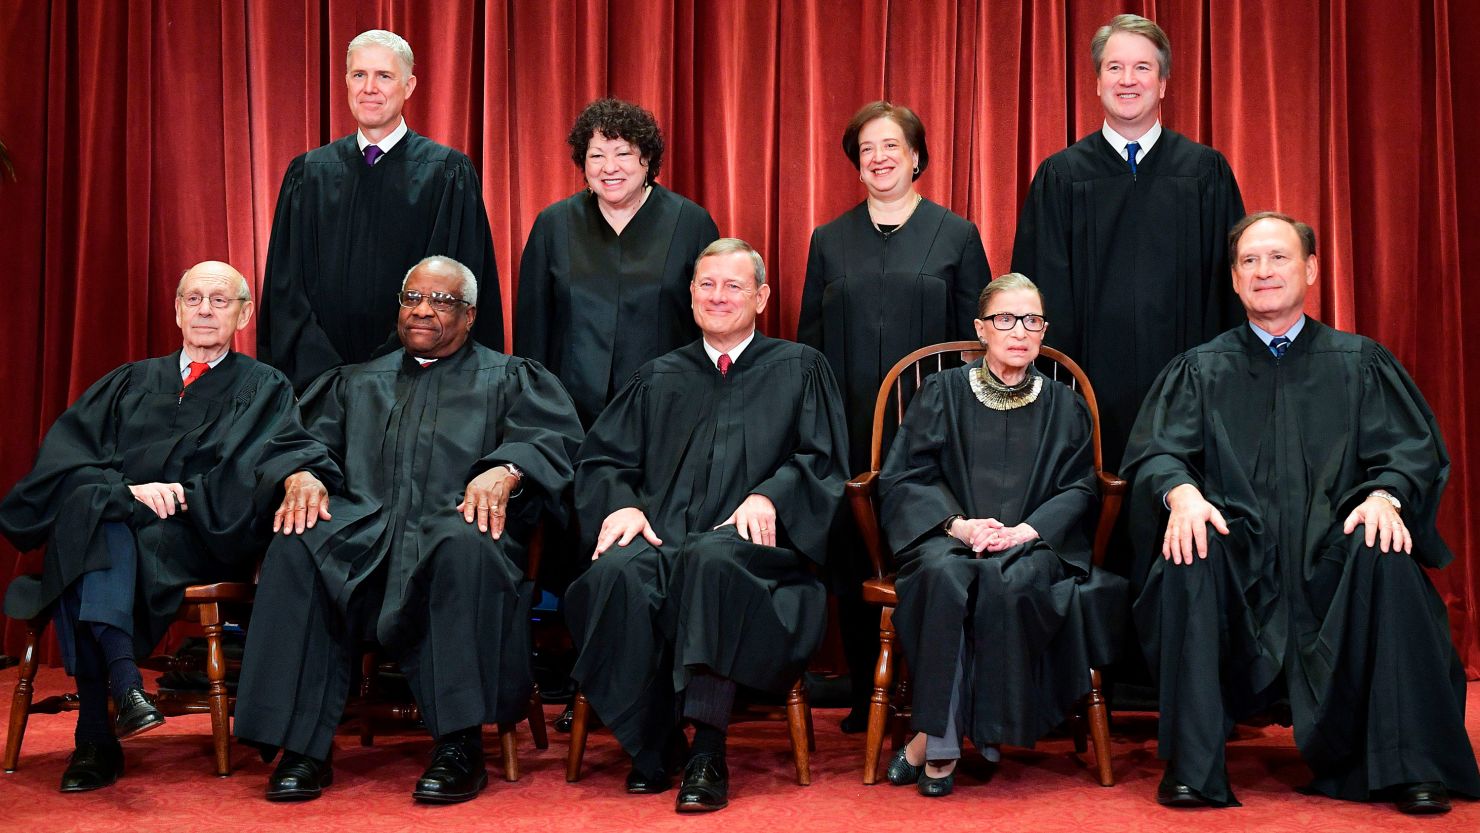 Justices of the US Supreme Court pose for their official photo at the Supreme Court in Washington, DC on November 30, 2018.  (Photo by MANDEL NGAN / AFP)   